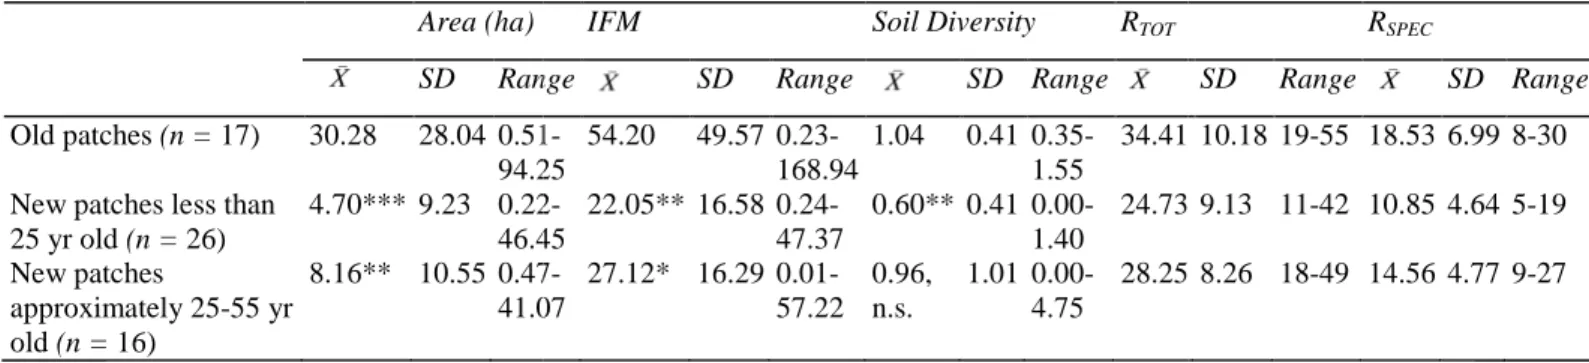 Table 2: Comparison of mean area, IFM, and soil diversity, as well as total (R